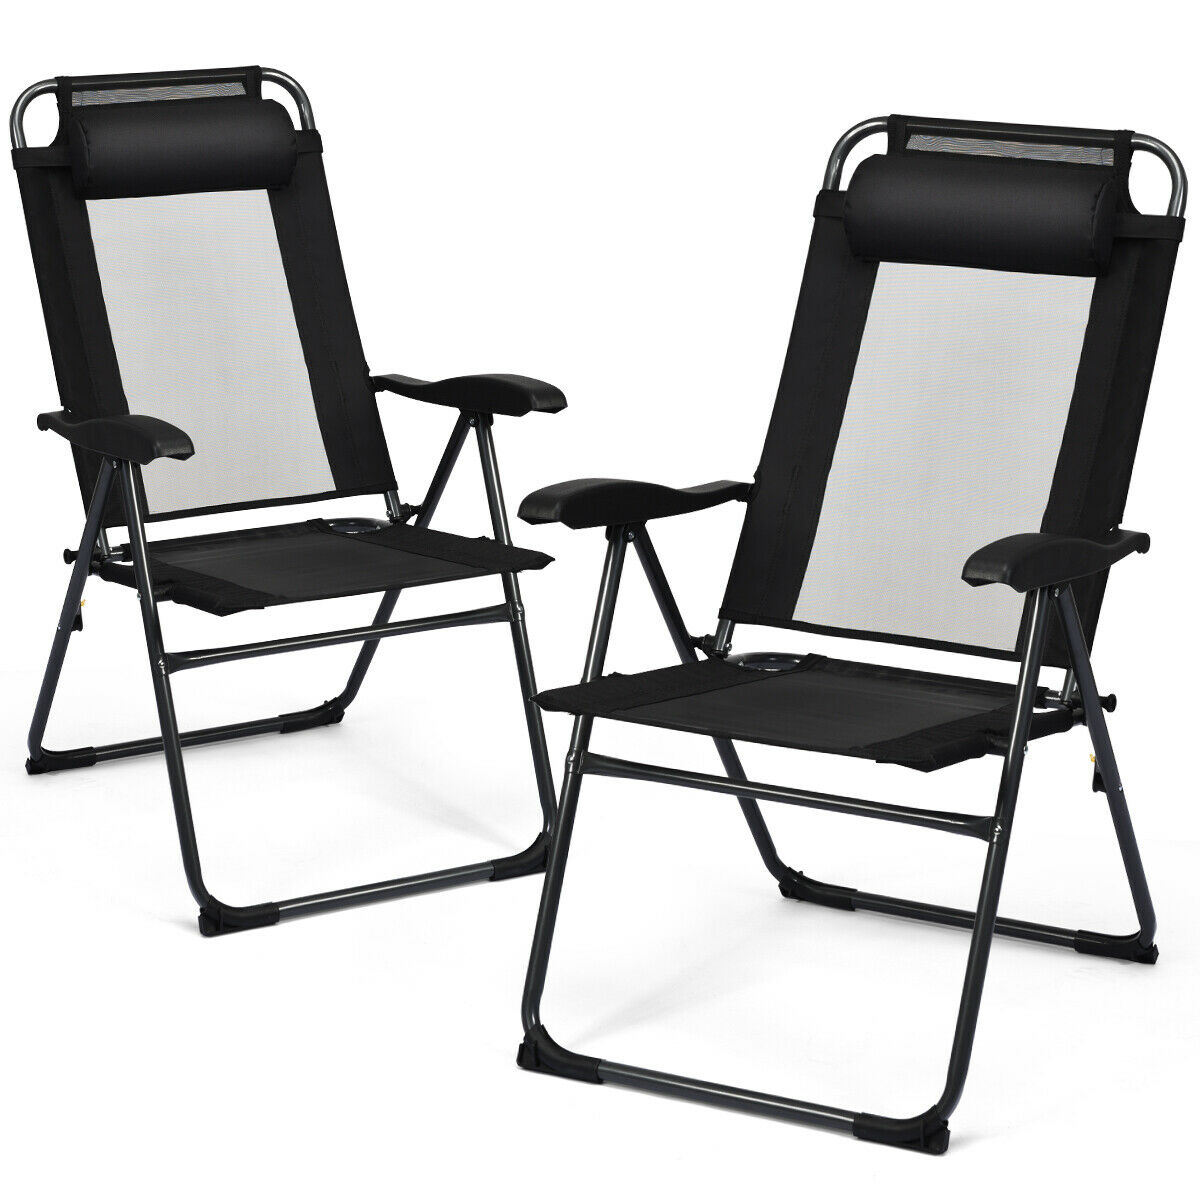 Gymax 2PC Folding Chairs Adjustable Reclining Chairs with Headrest Patio Garden Black - image 4 of 10